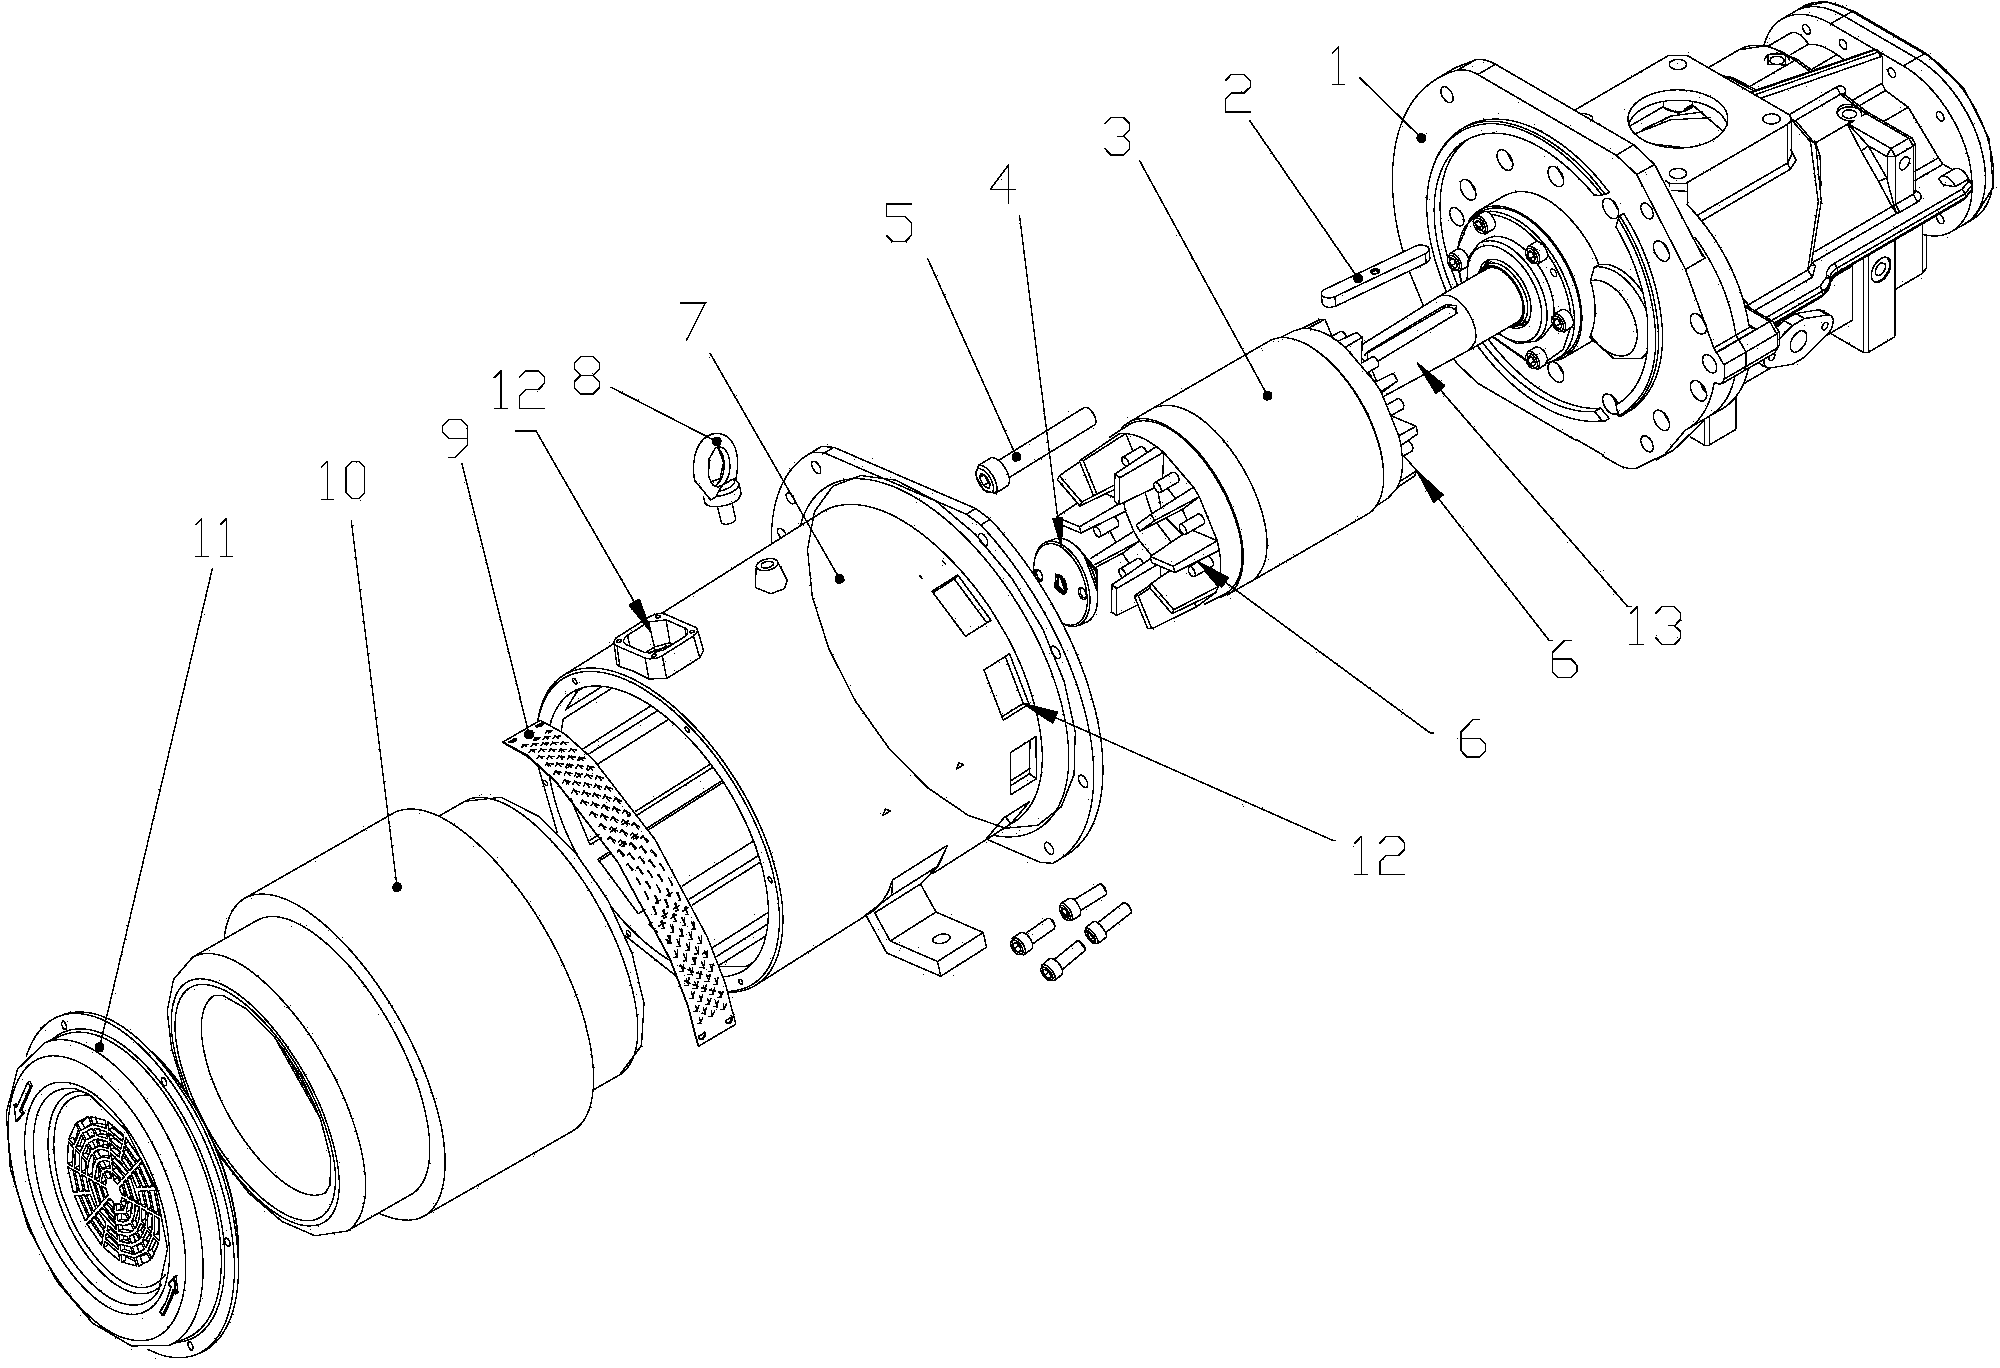 Direct-connection integrated screw machine-driven asynchronous motor